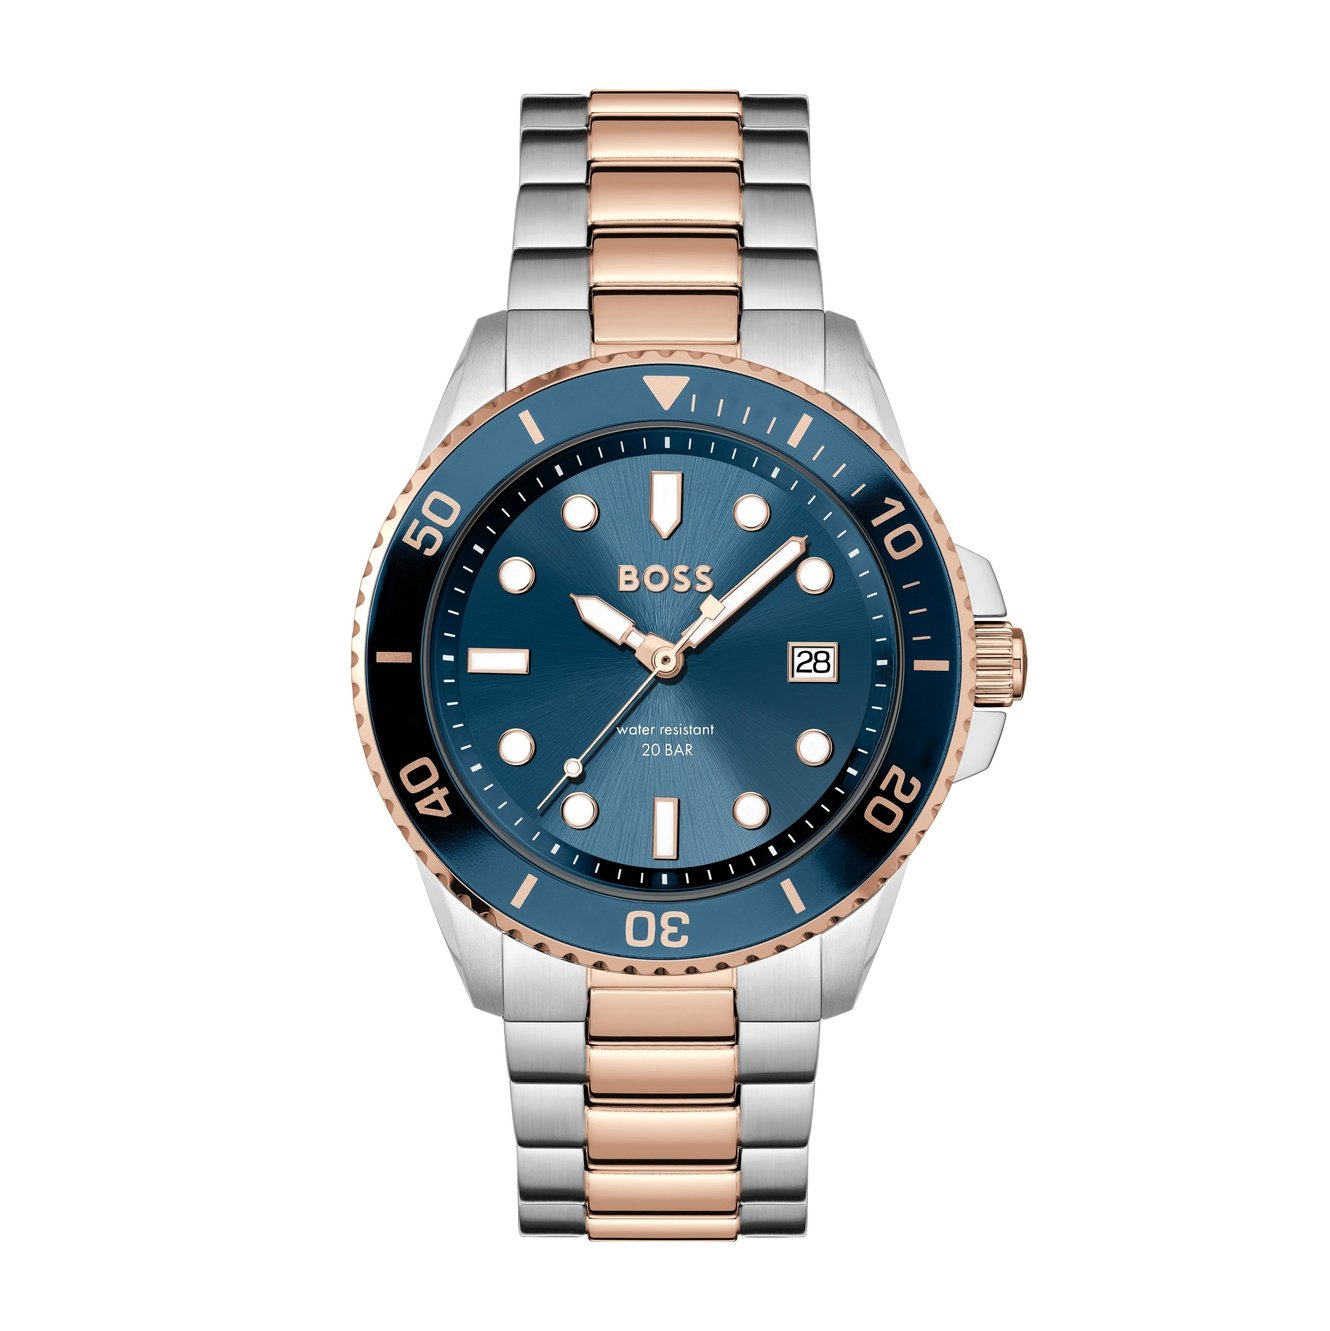 HUGO BOSS Watches For Men And Women | Shop Online Now – Page 3